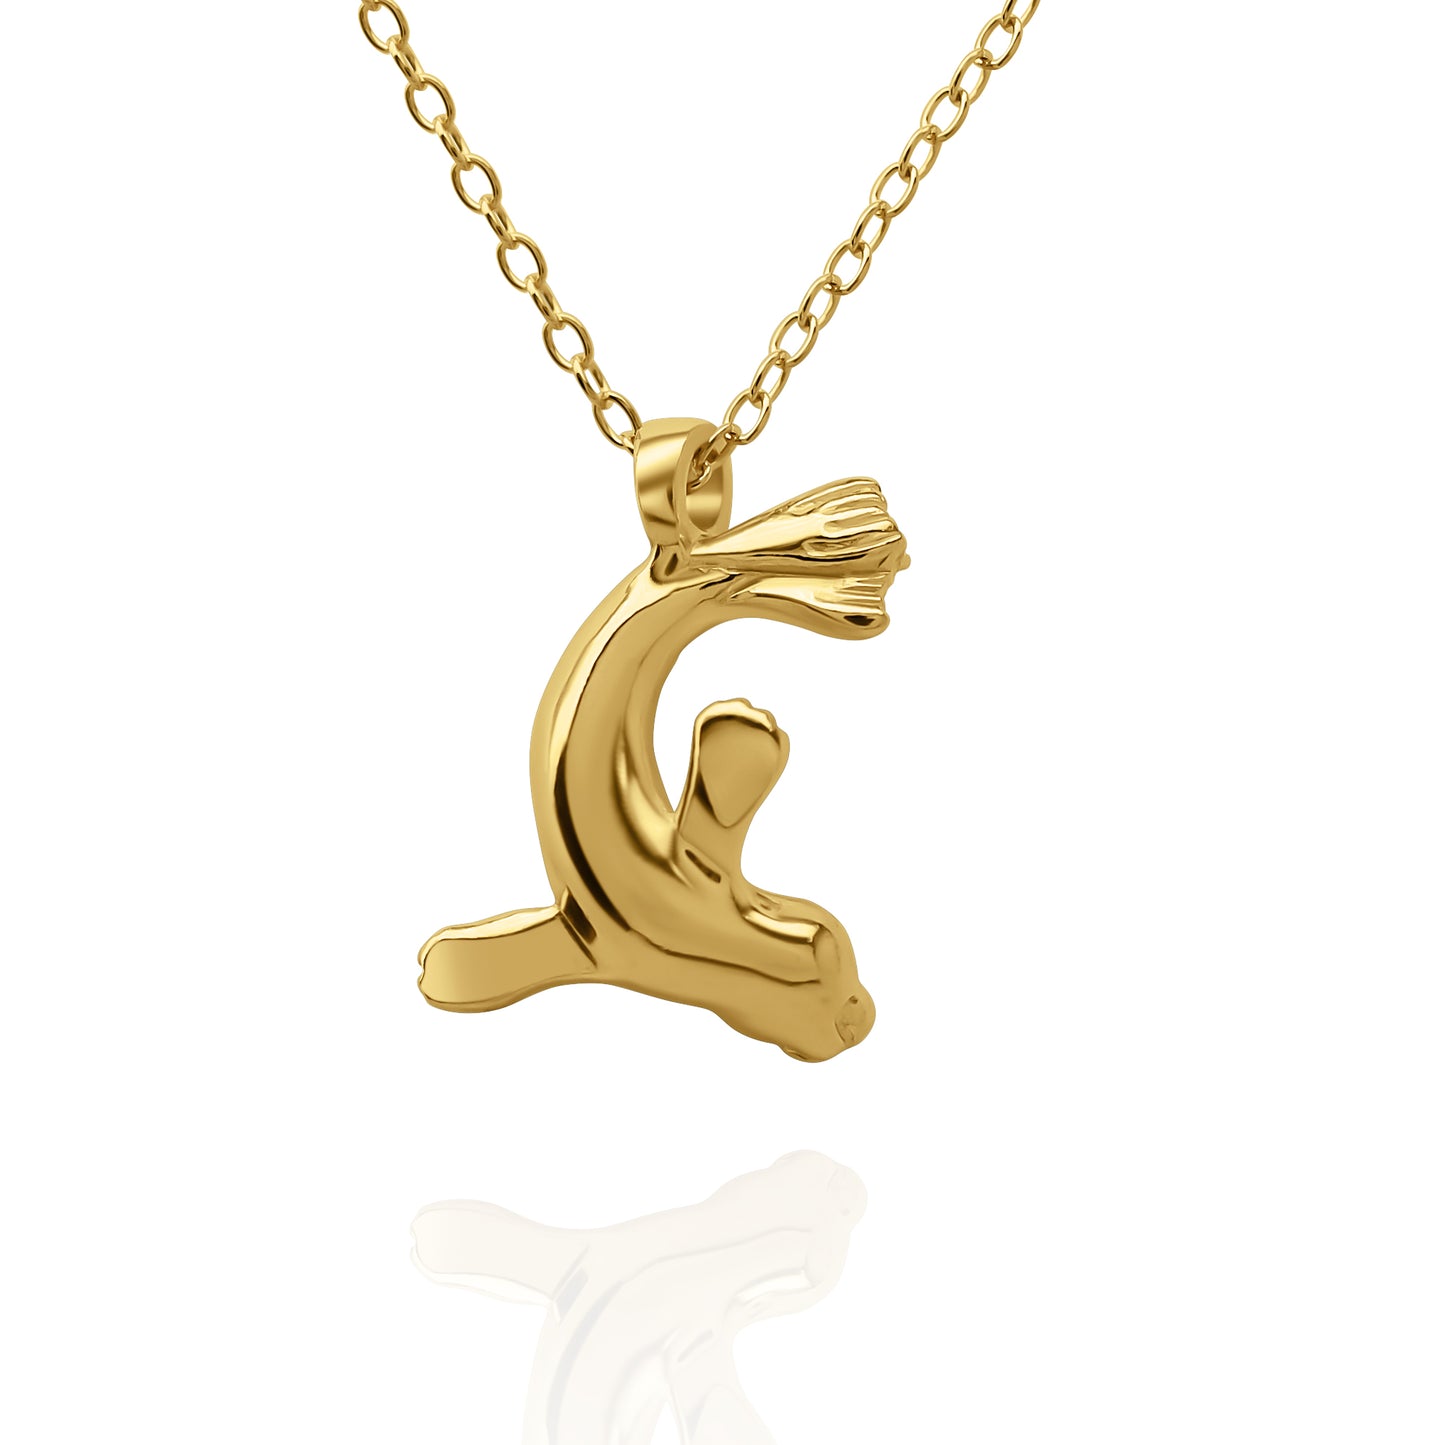 Gold vermeil Seal charm pendant and chain. © Adrian Ashley